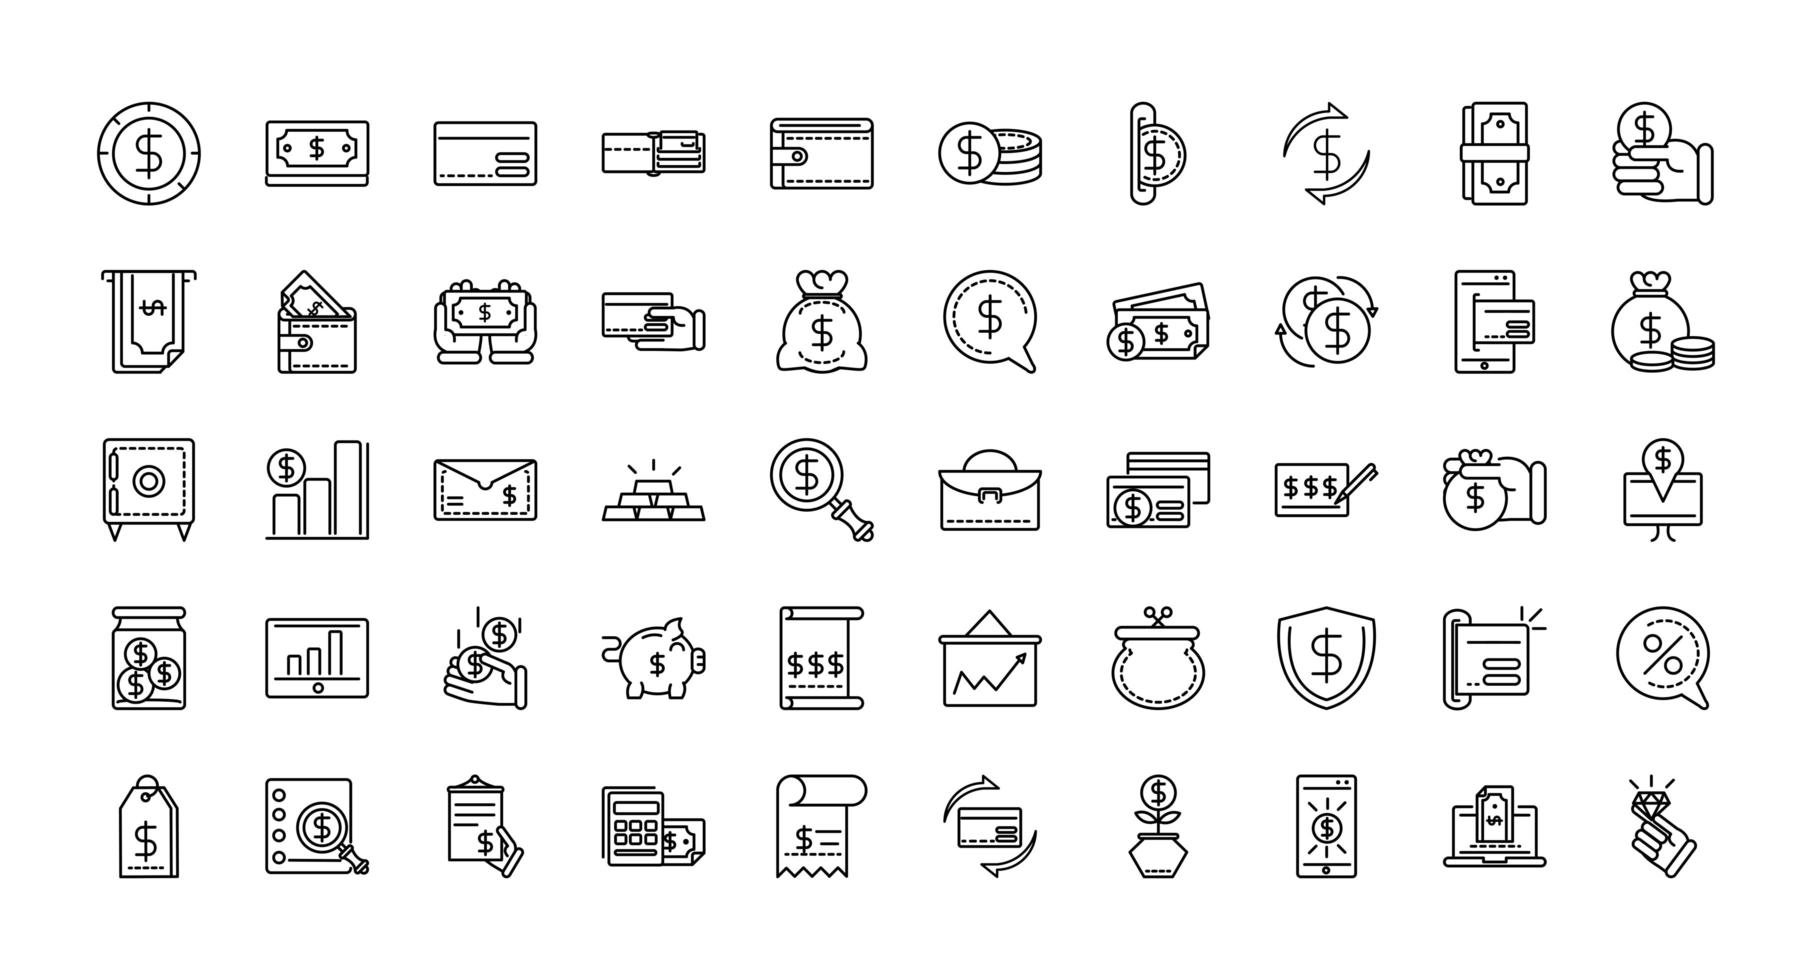 Finances and business line-art icon set vector